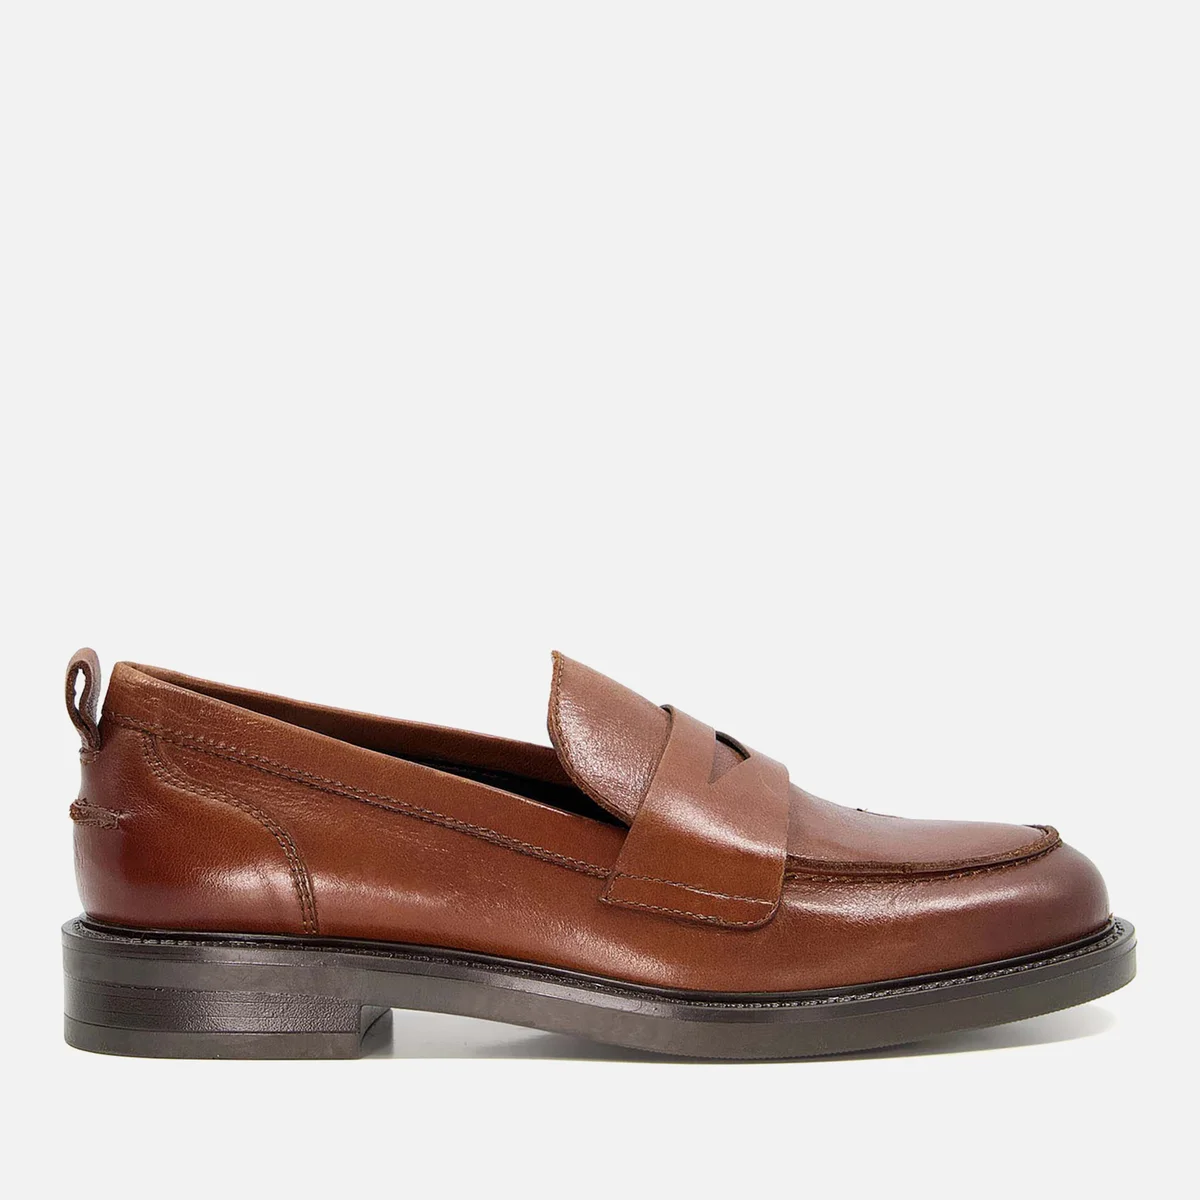 Dune Women's Geeno Leather Penny Loafers Image 1